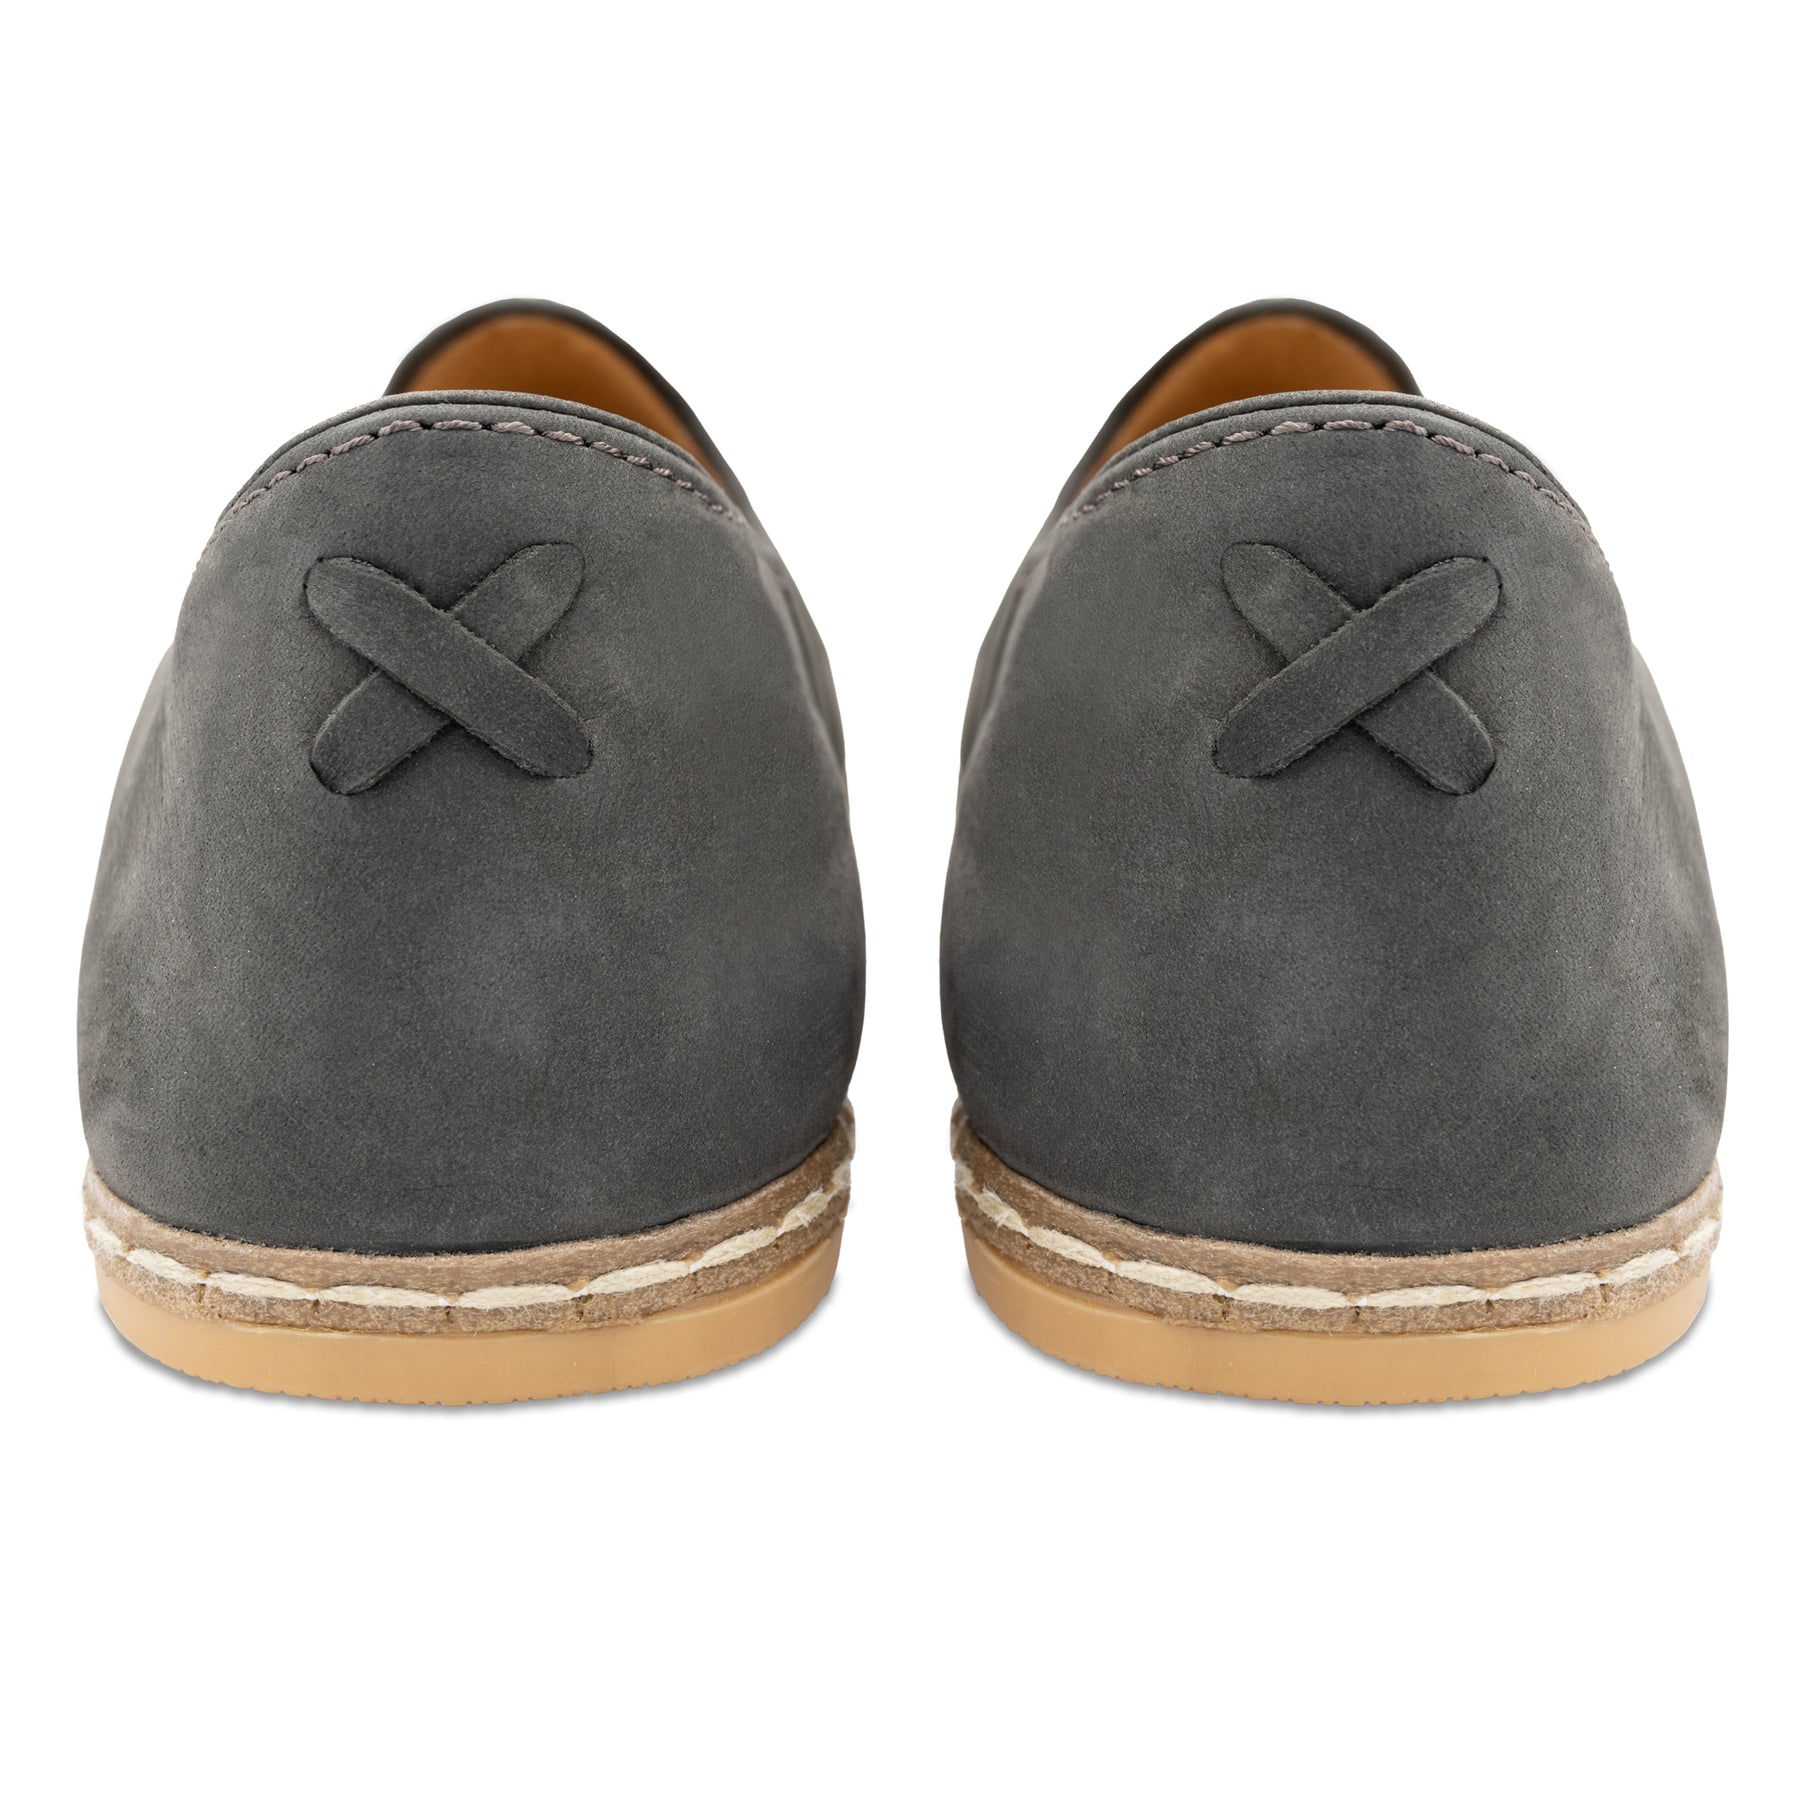 Graphite Suede Slip On Shoes - Charix Shoes